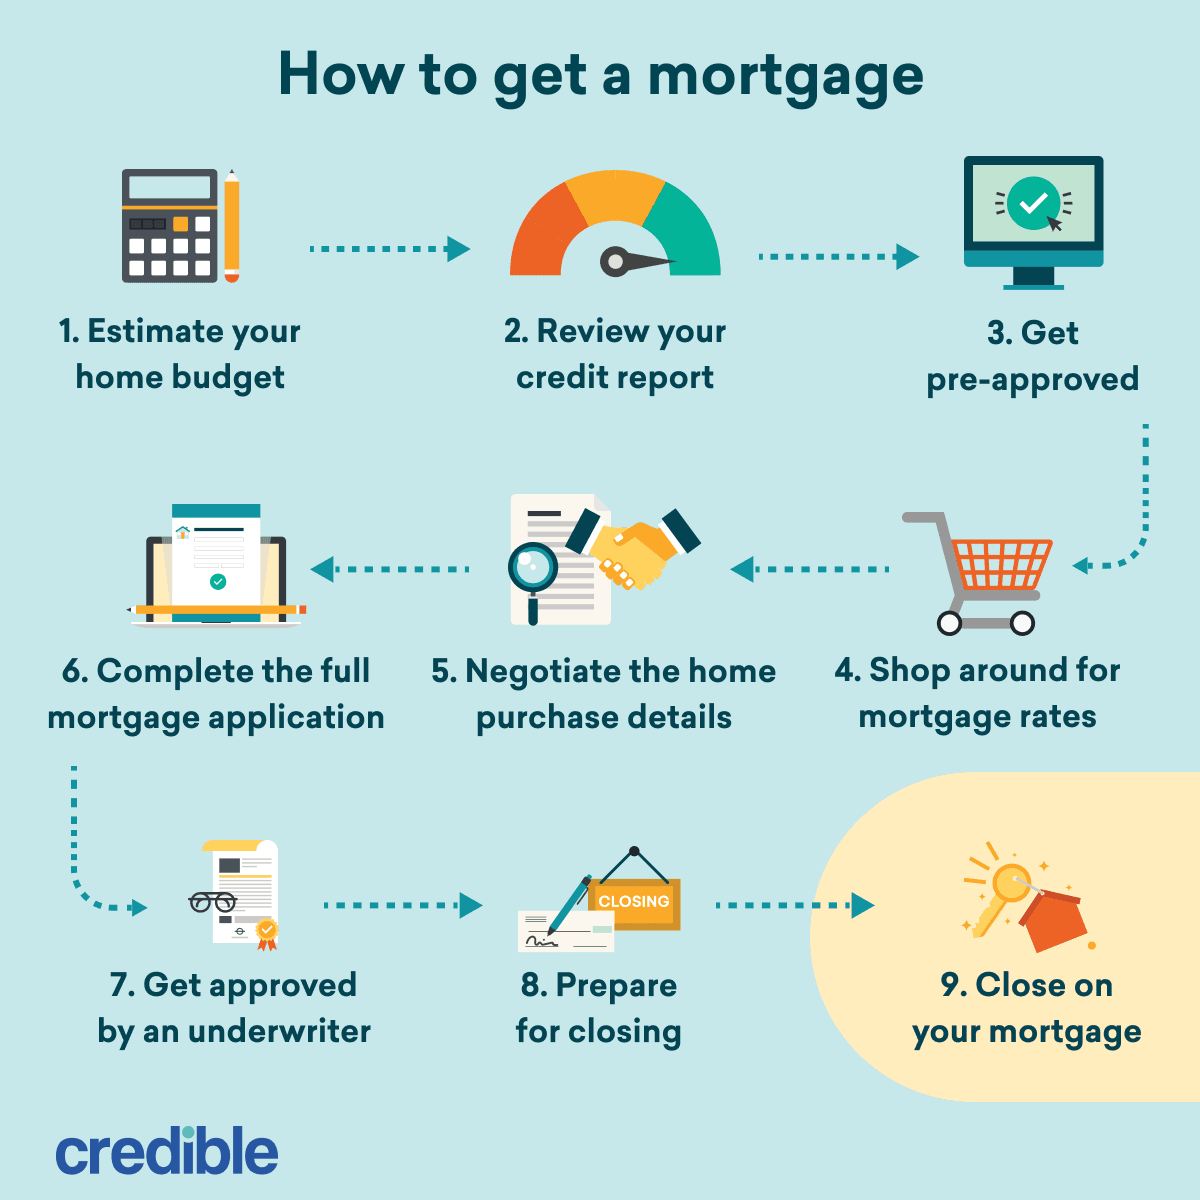 Flowchart of how to get a mortgage